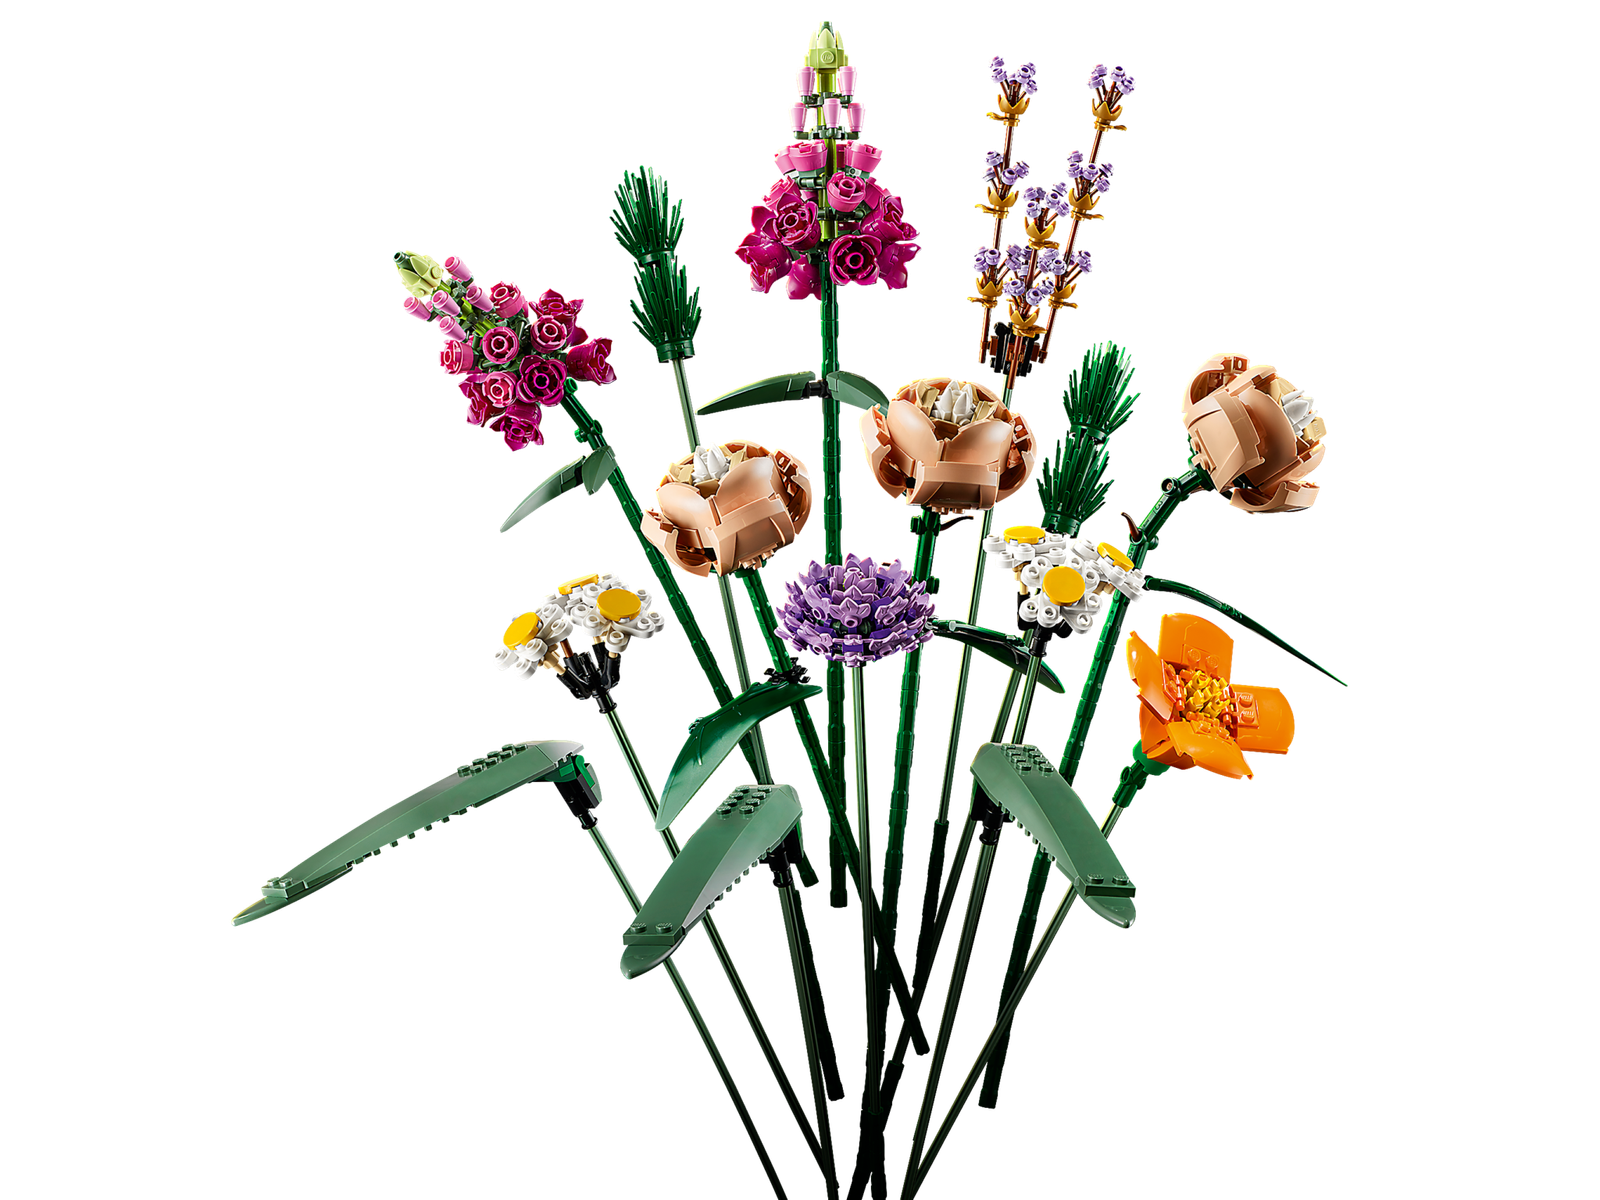 Lego flower bouquet is ‘beautifully realistic, here’s how to buy the